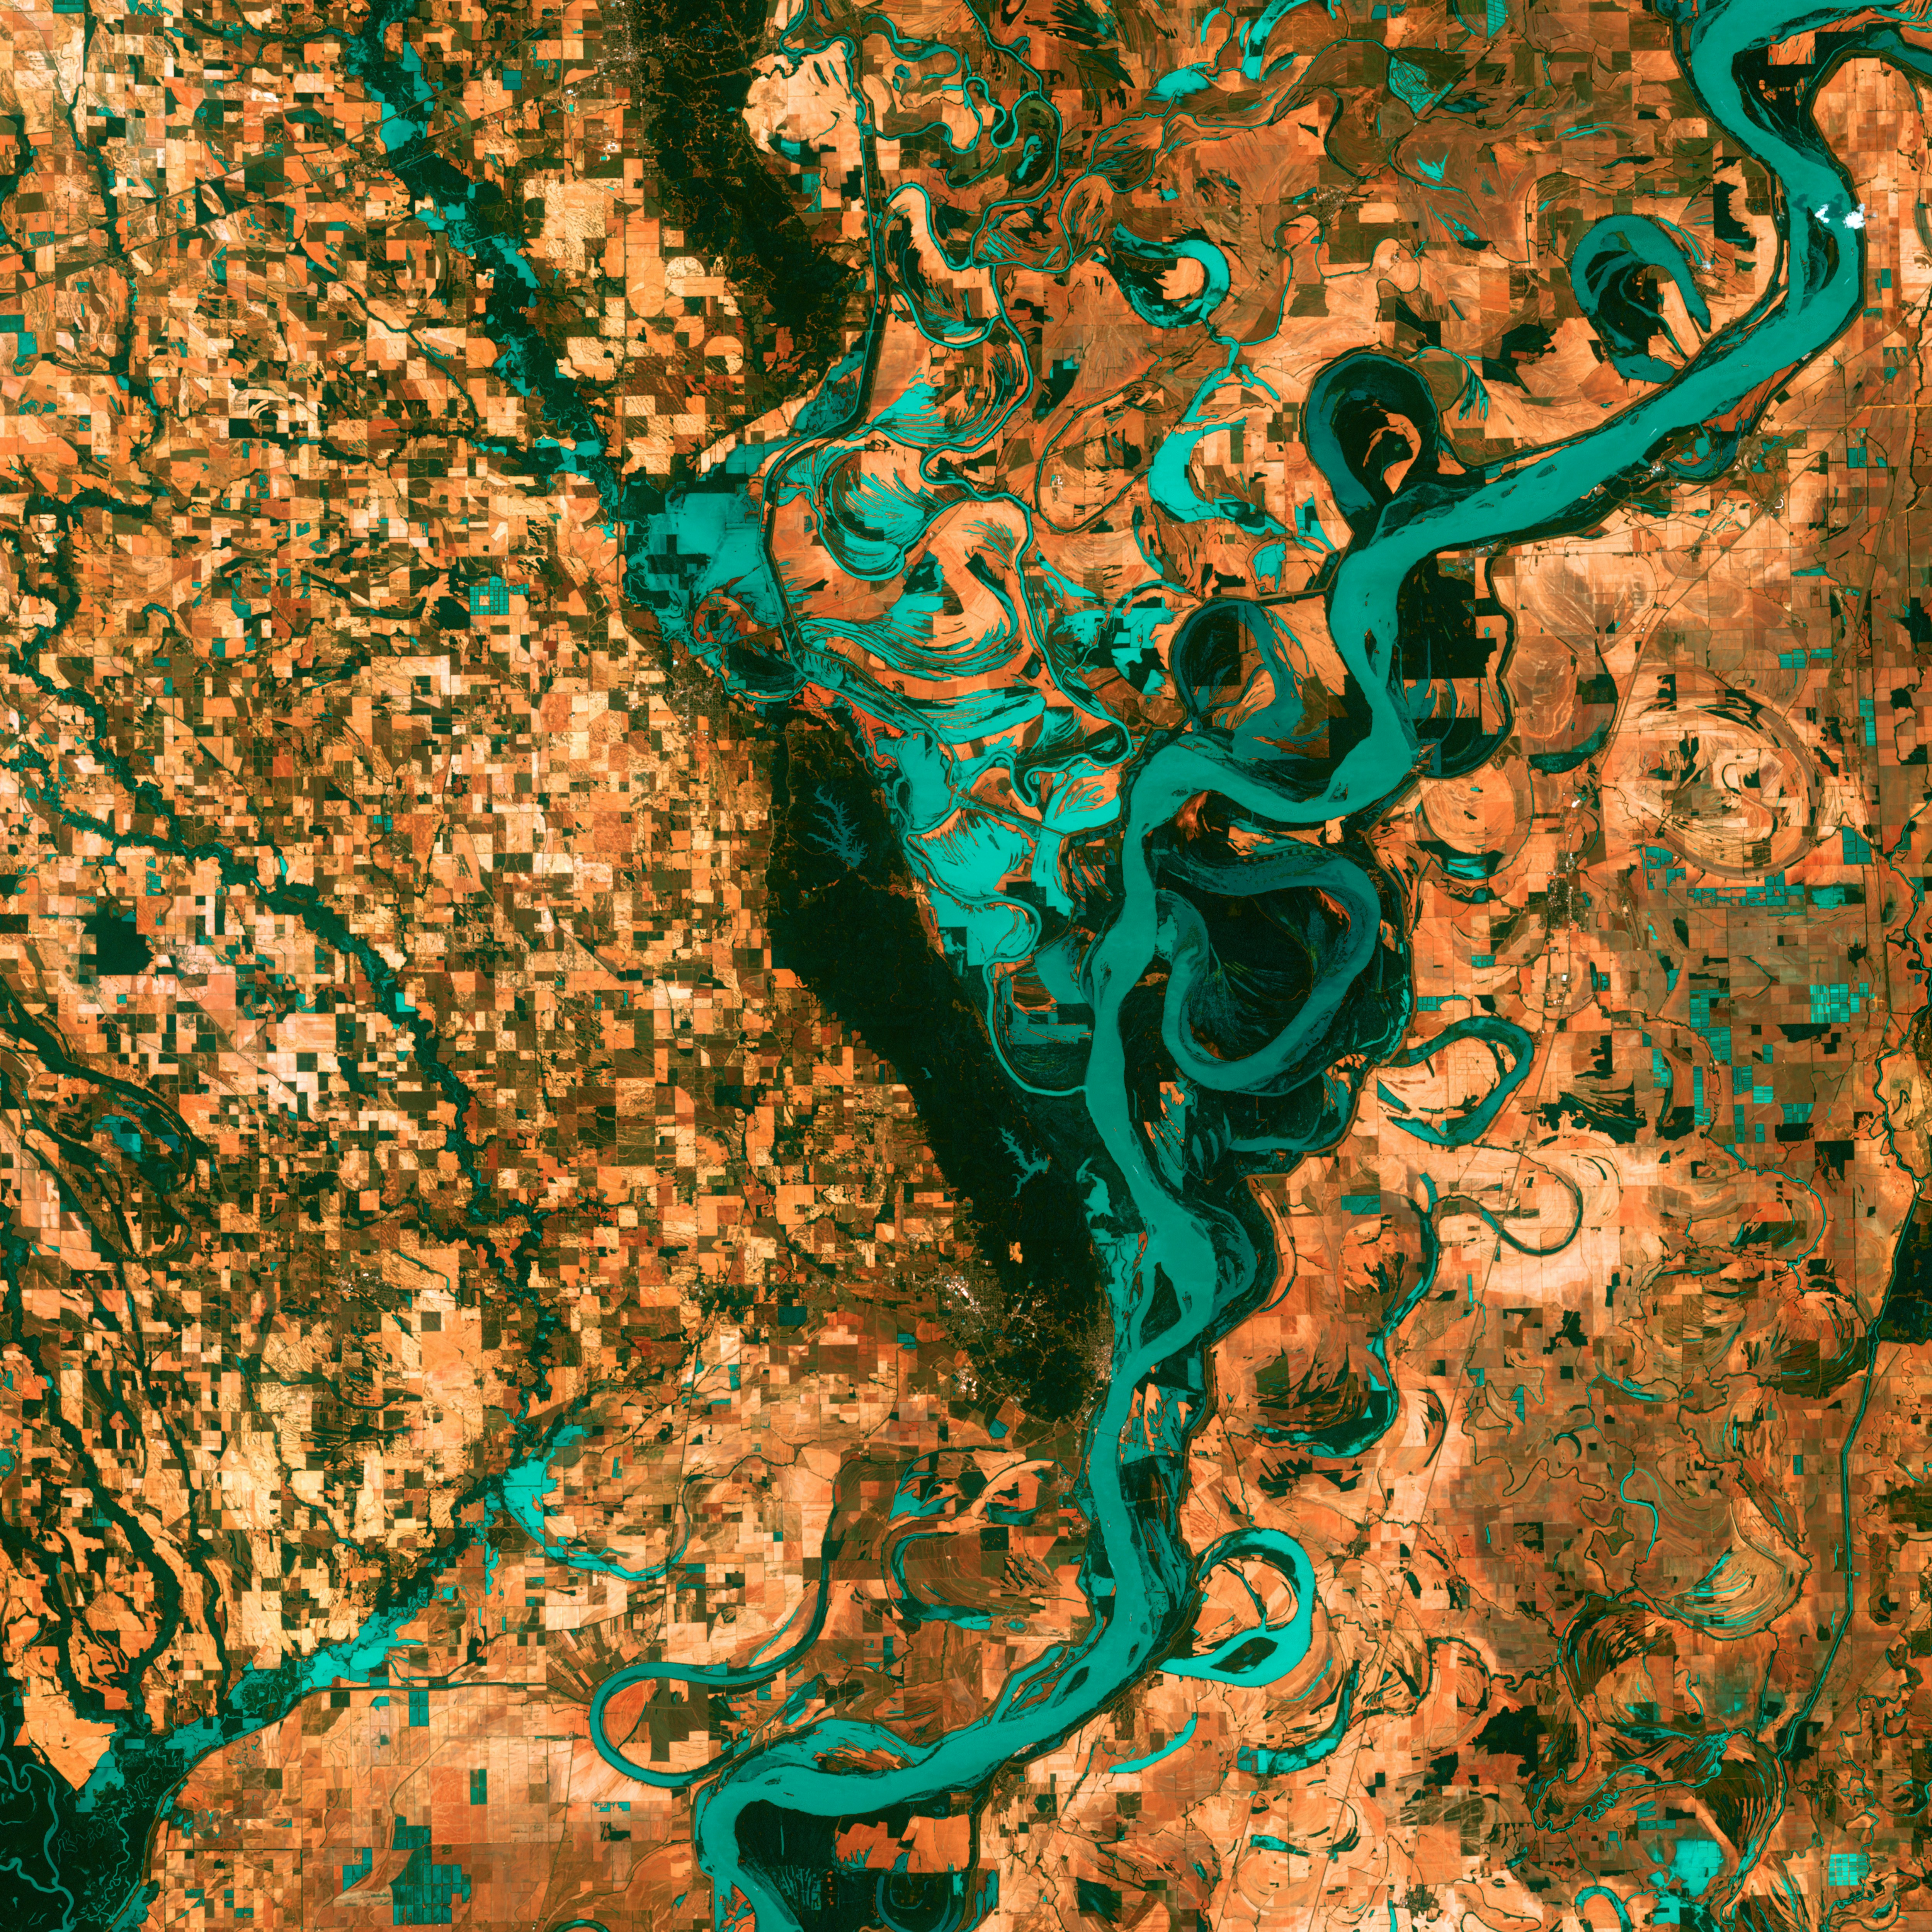 Small, blocky shapes of towns, fields, and pastures surround the graceful swirls and whorls of the Mississippi River. Countless oxbow lakes and cutoffs accompany the meandering river south of Memphis, Tennessee, on the border between Arkansas and Mississippi, USA. The \